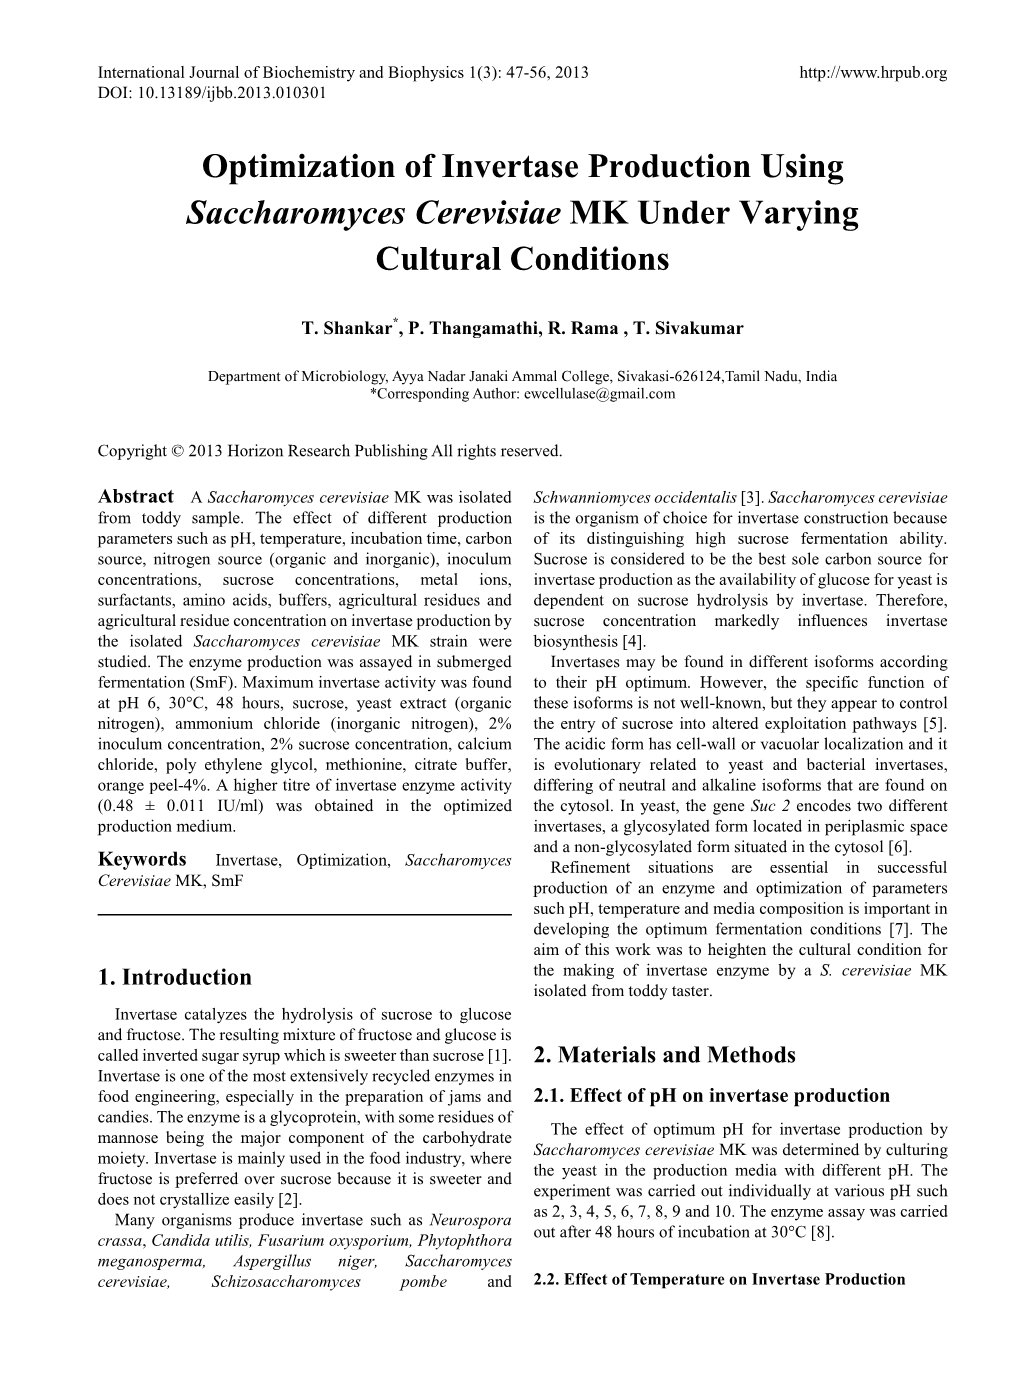 Optimization of Invertase Production Using Saccharomyces Cerevisiae MK Under Varying Cultural Conditions